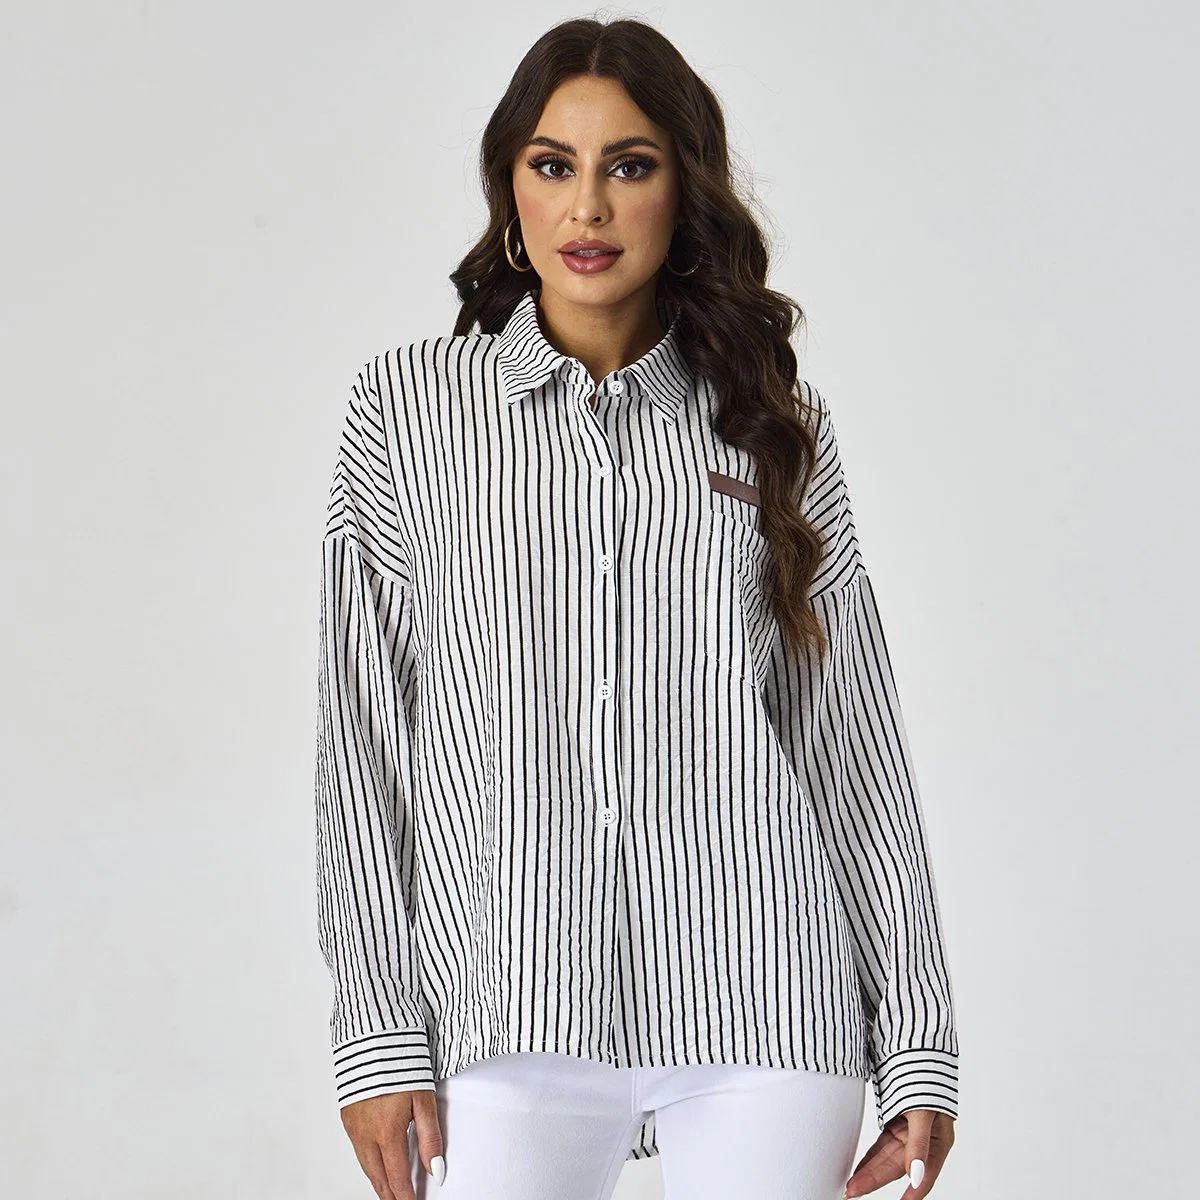 Custom Stripe Printing Collor Down Pocket Patch Casual Female Top Long Sleeve Women Shirts